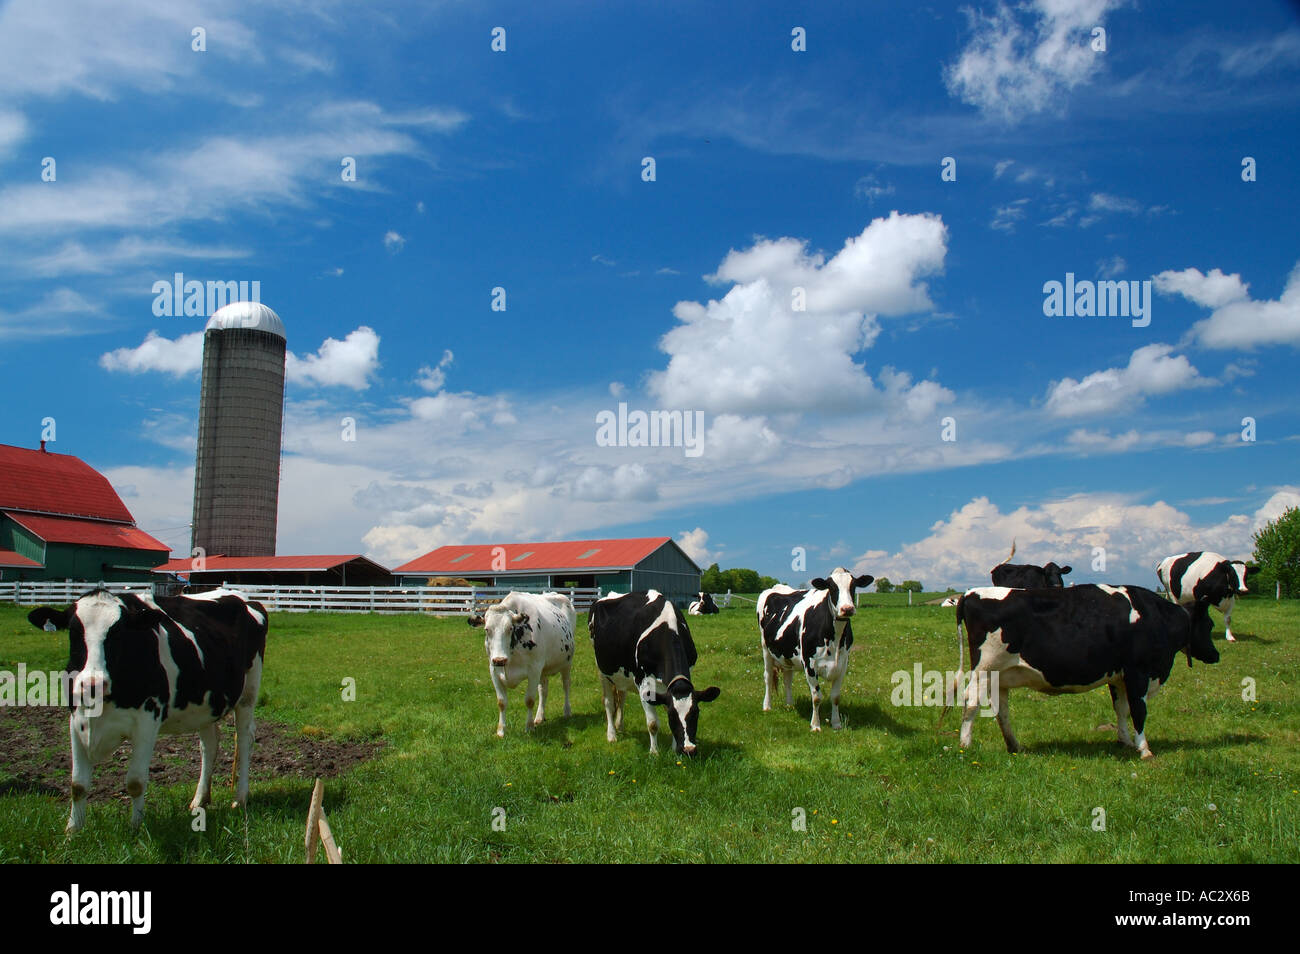 Curious Holstein cows in a field with barn and silo Stock Photo